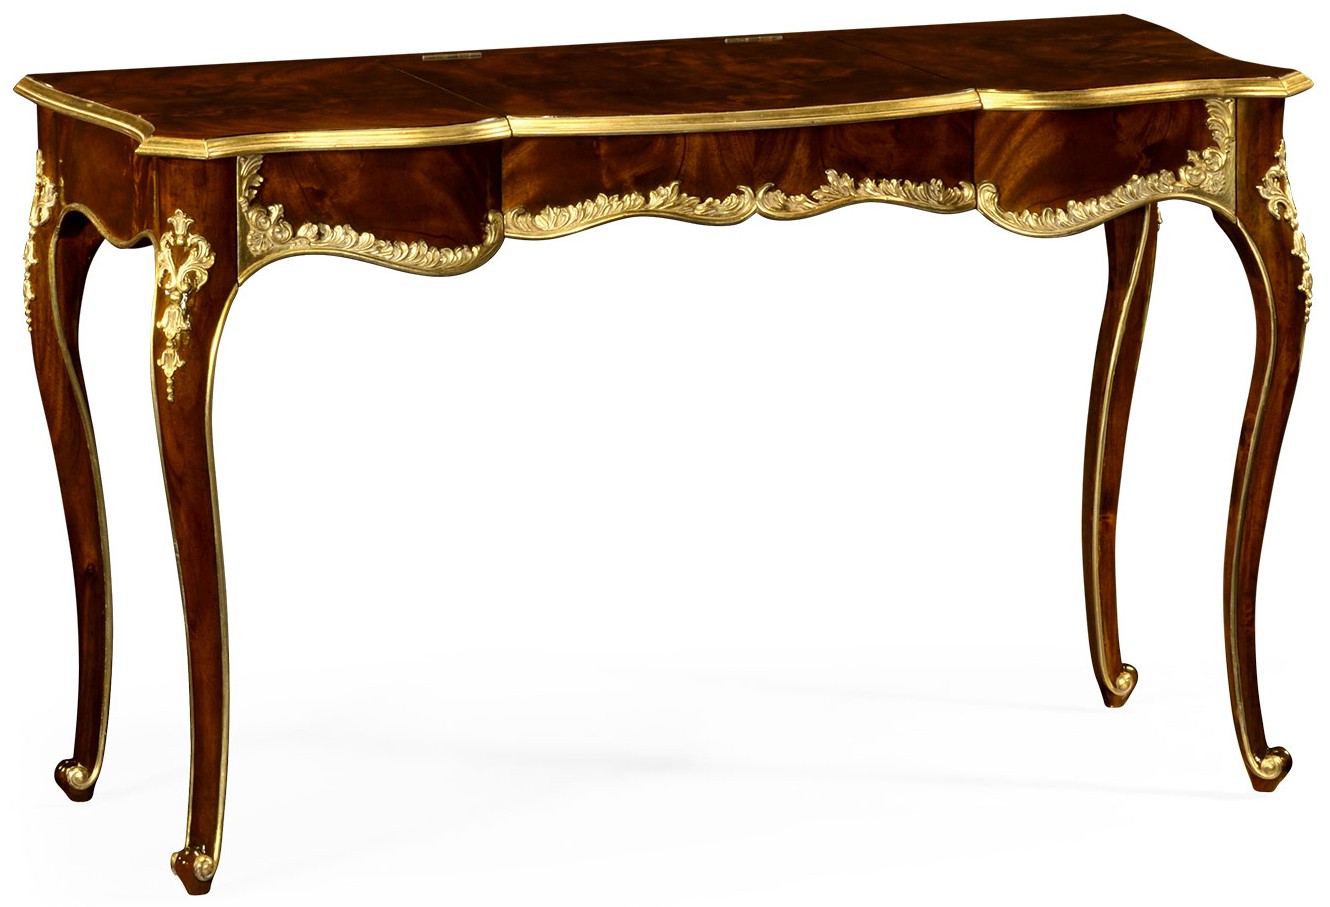 Dressing Vanities & Furnishings Dressing table with gilt carved detailling